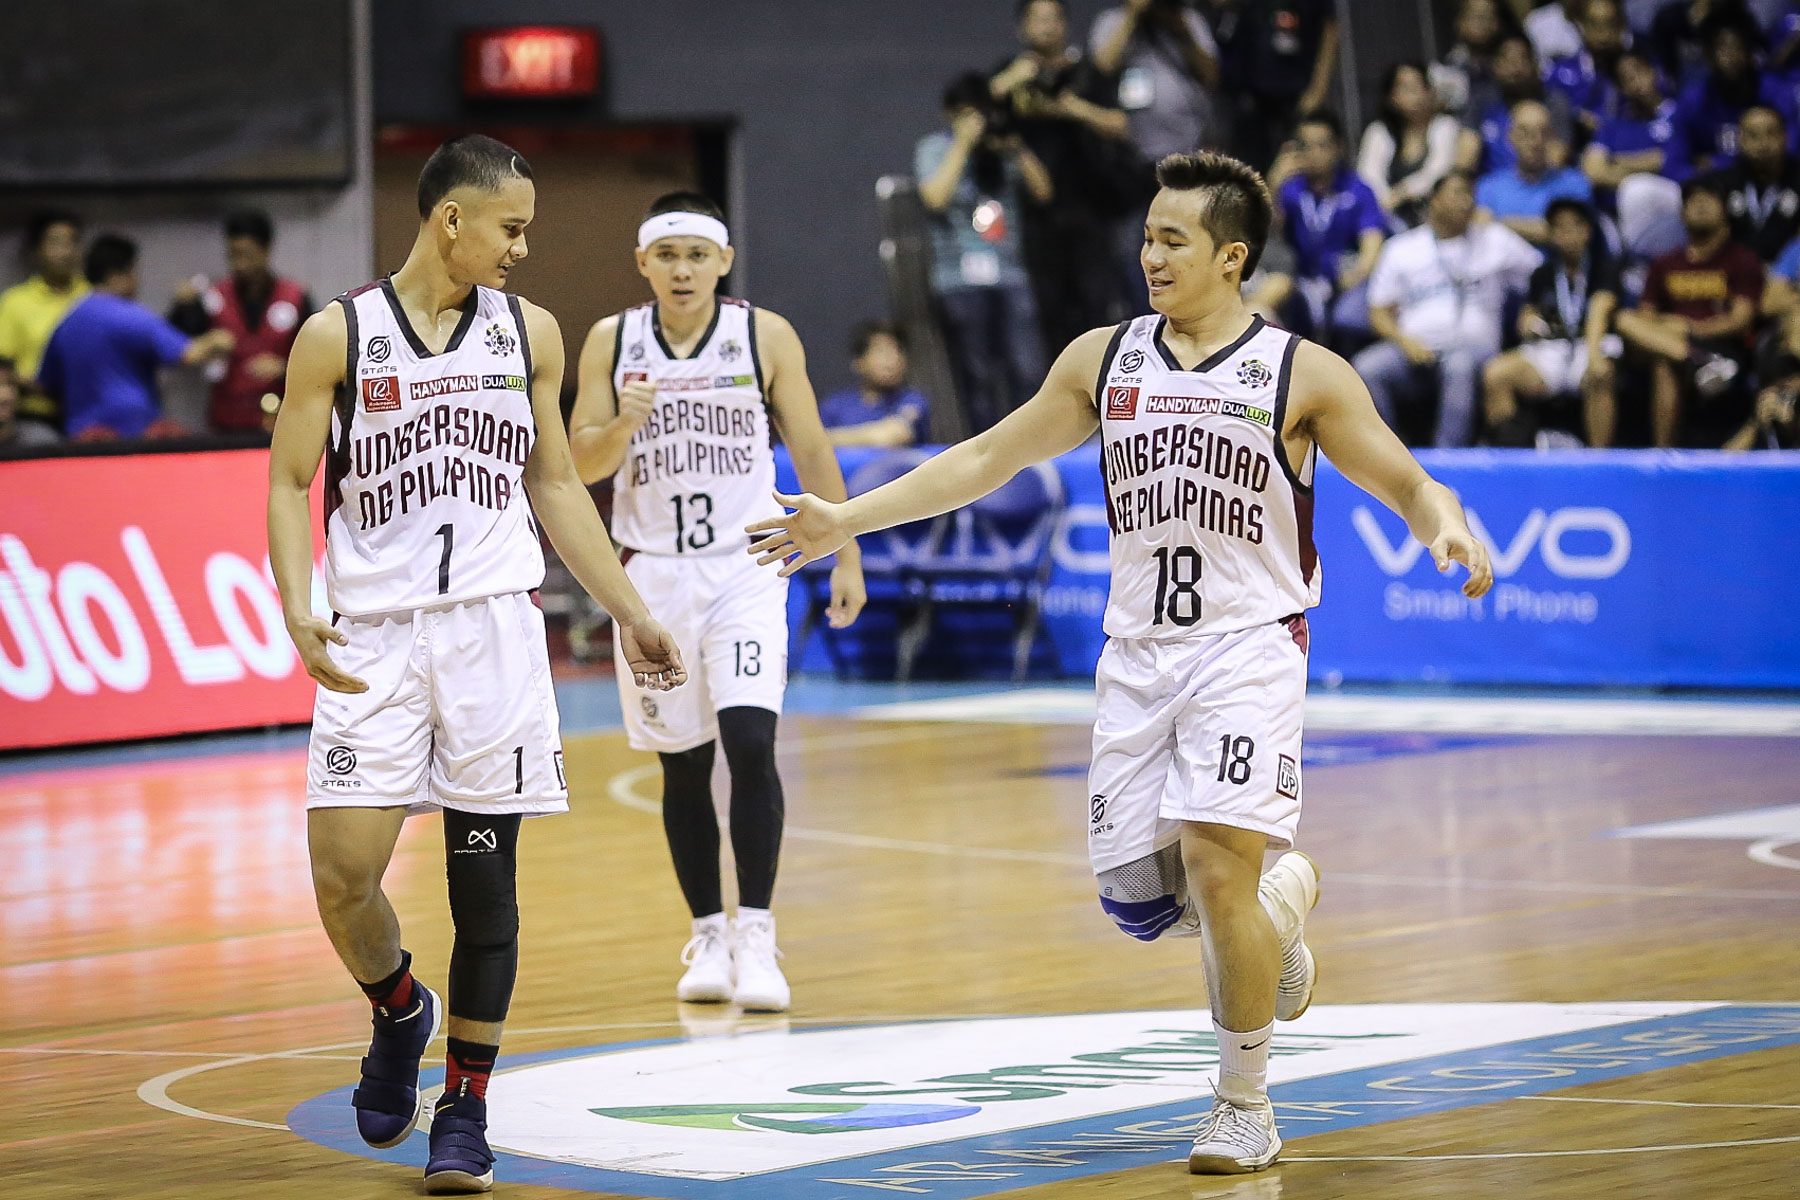 Paul Desiderio lifts Fighting Maroons to convincing win over Red Warriors